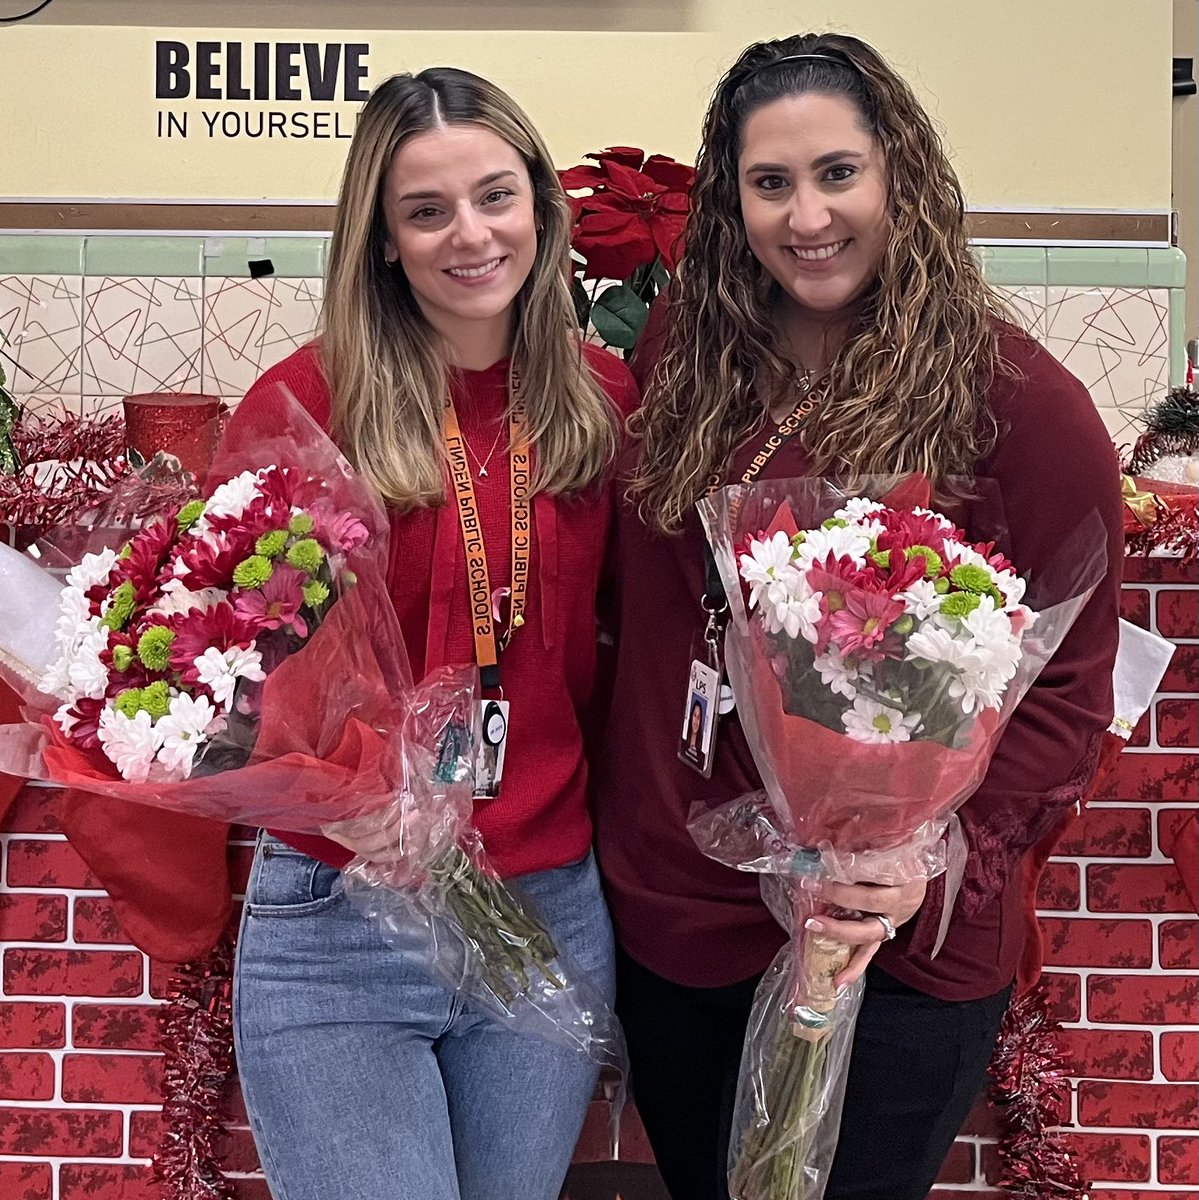 Congratulations to our School No. 10 Teacher of the Year, Ms. Parisi, and our Educational Services Professional of the Year, Mrs. Clark! 🎉👏🧡 #School10Rocks #WeAreSchool10 @AtiyaYPerkins